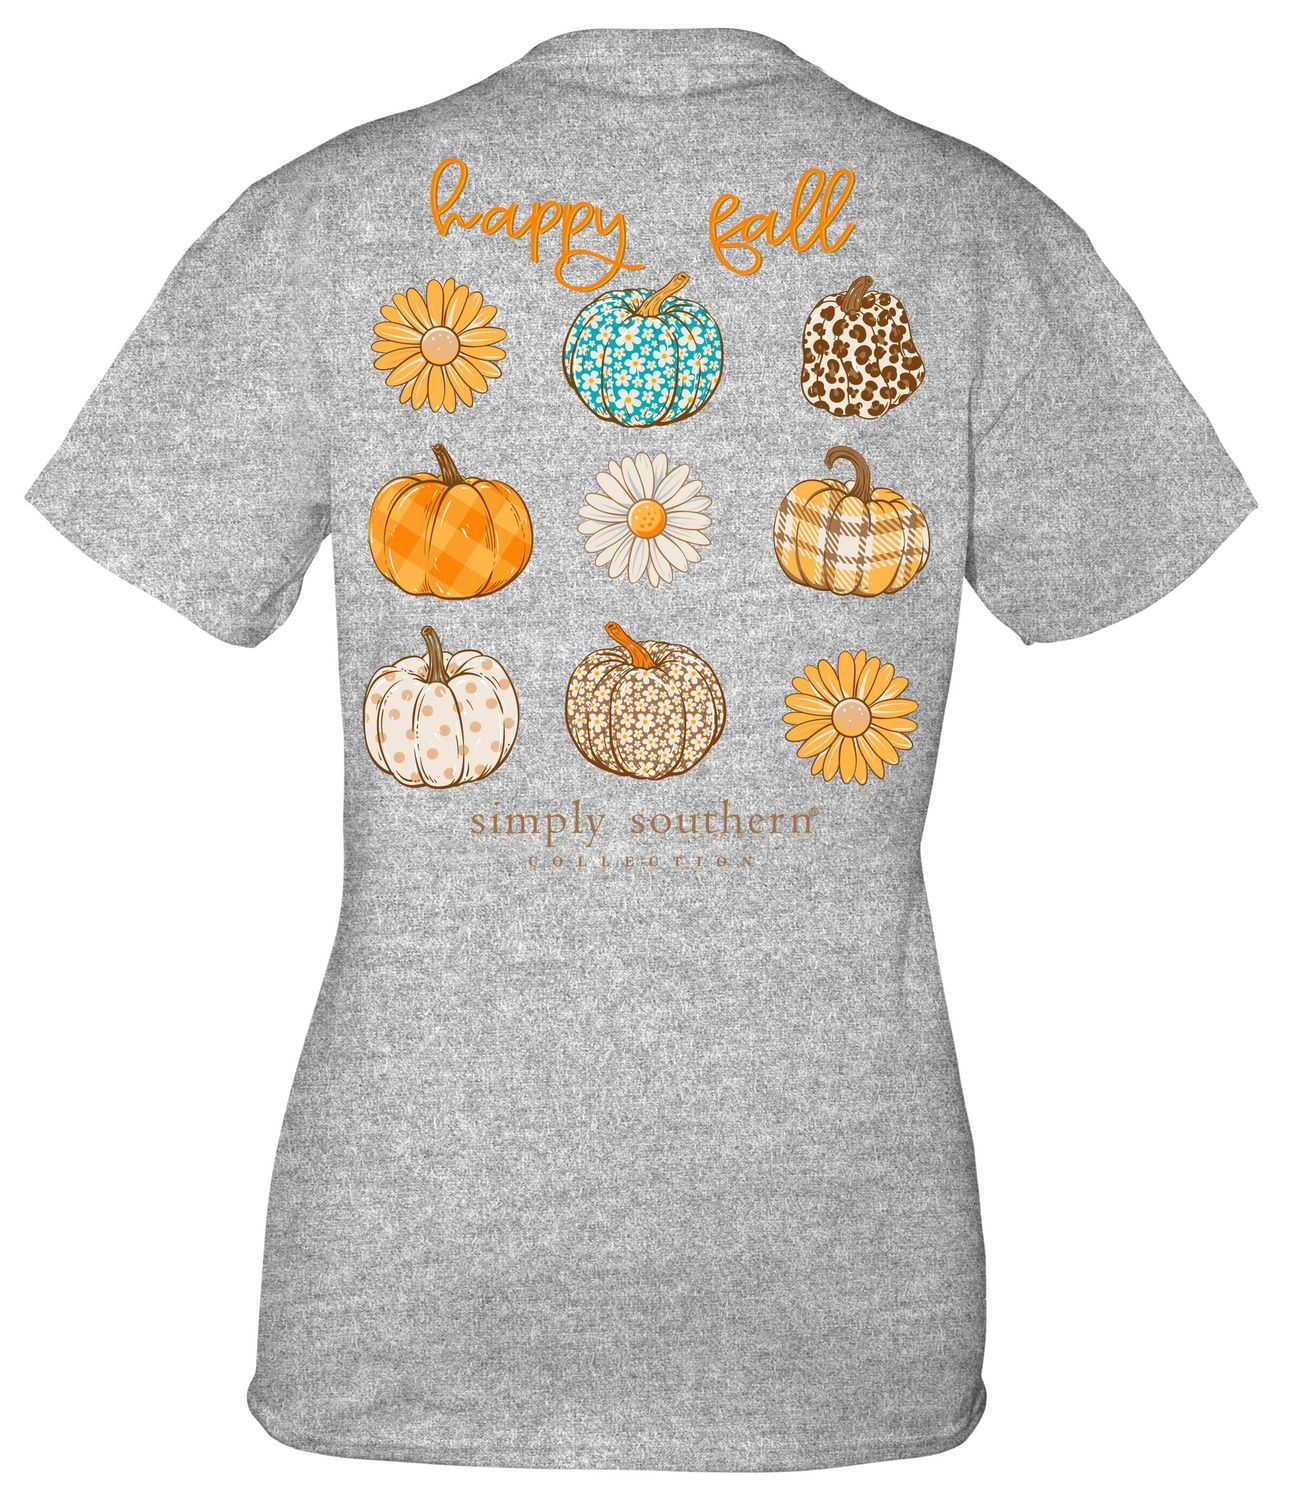 Simply Southern Happy Fall Short Sleeve Shirt+, Size: Small